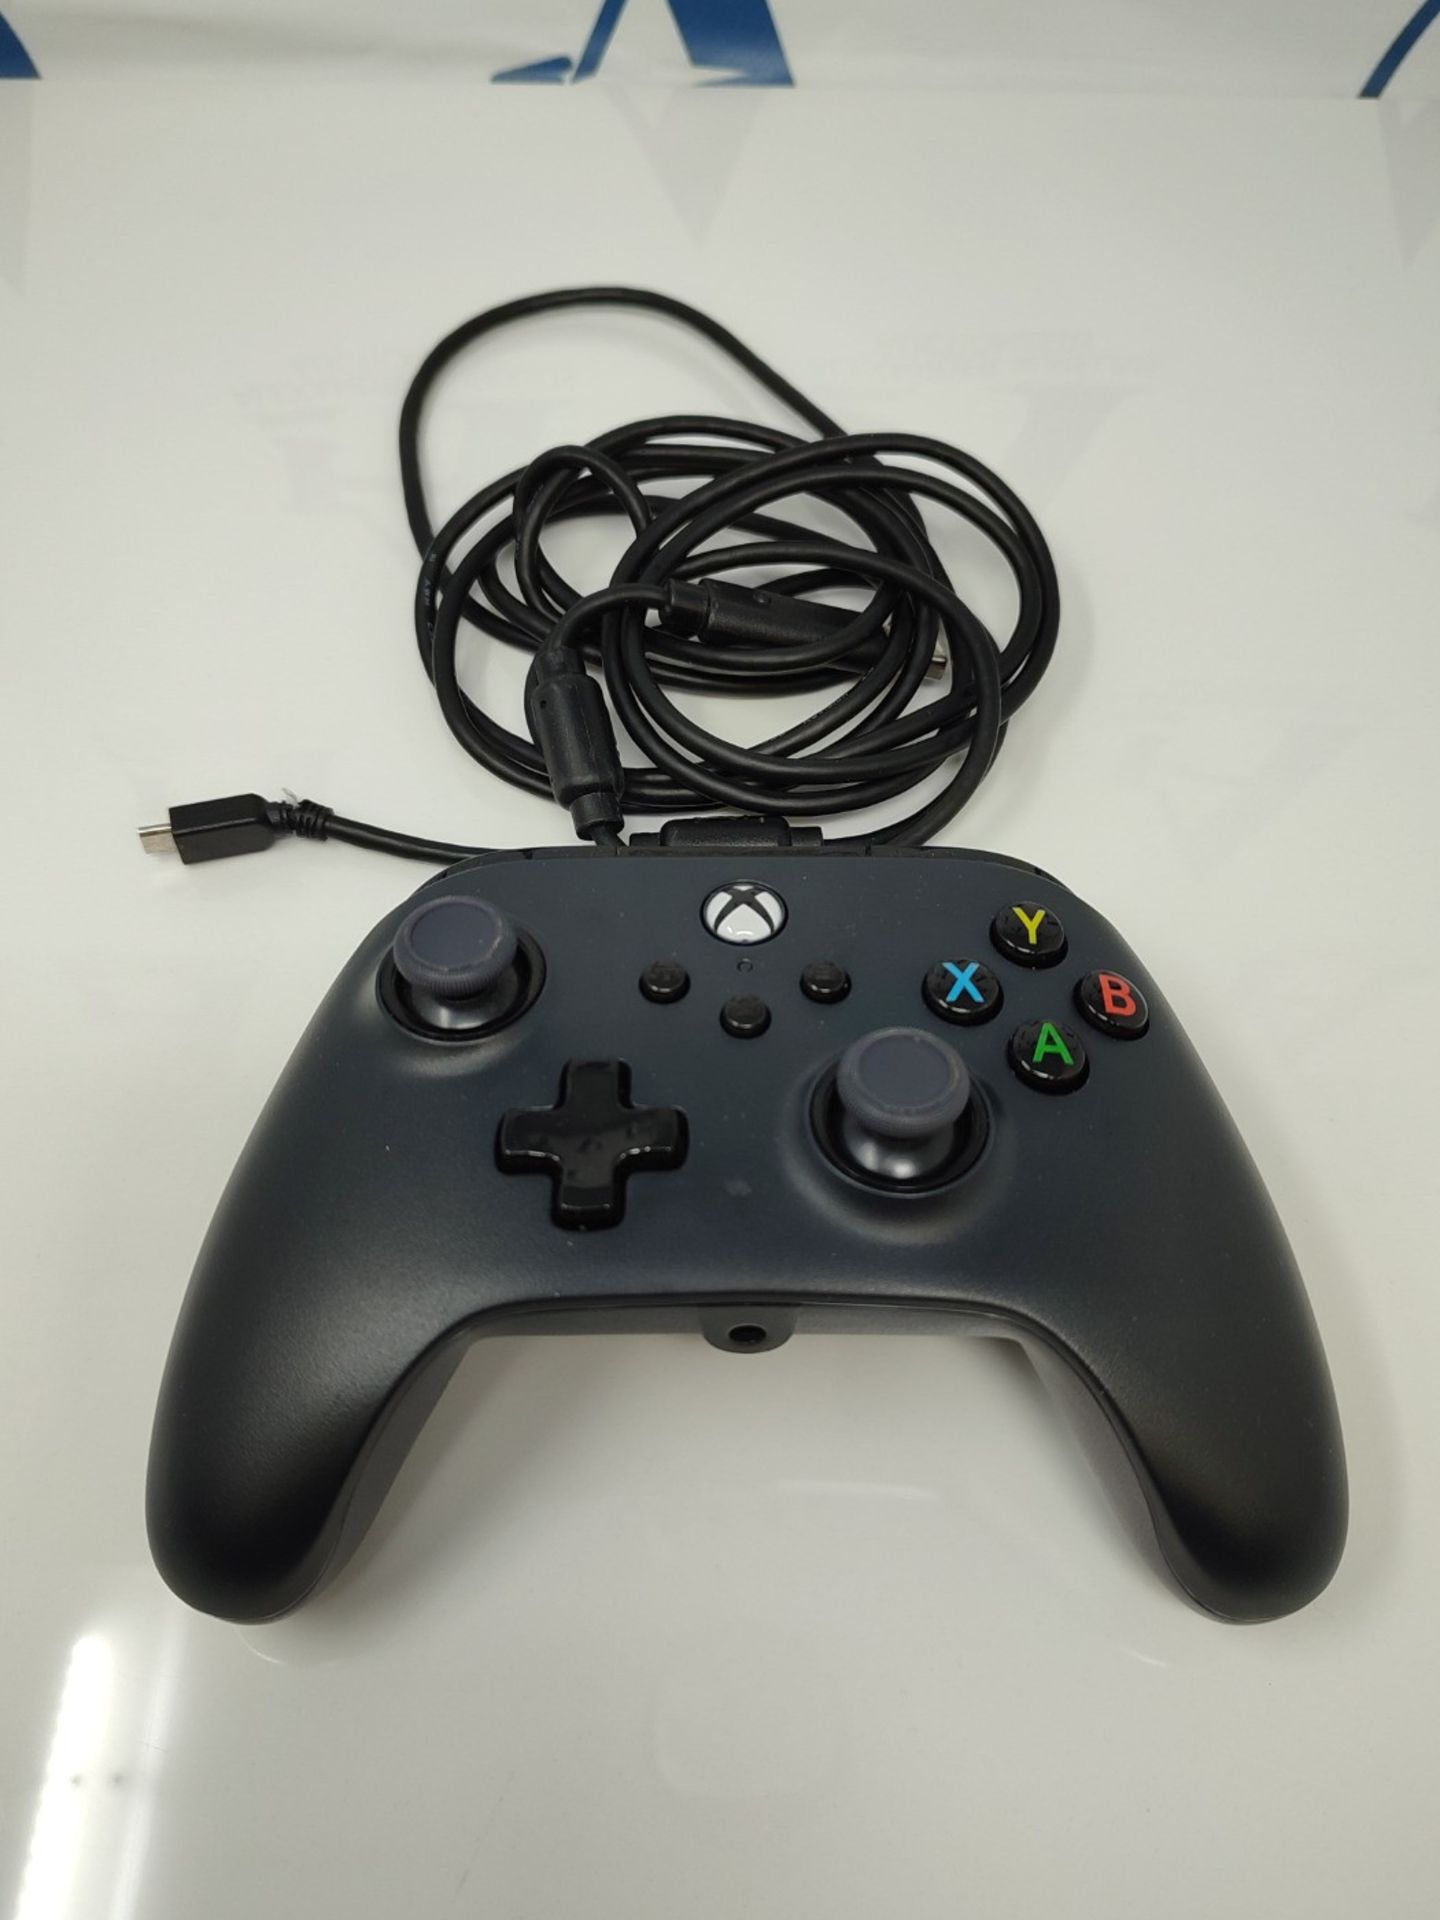 PowerA Wired Controller for Xbox Series X|S - Black - Image 3 of 3